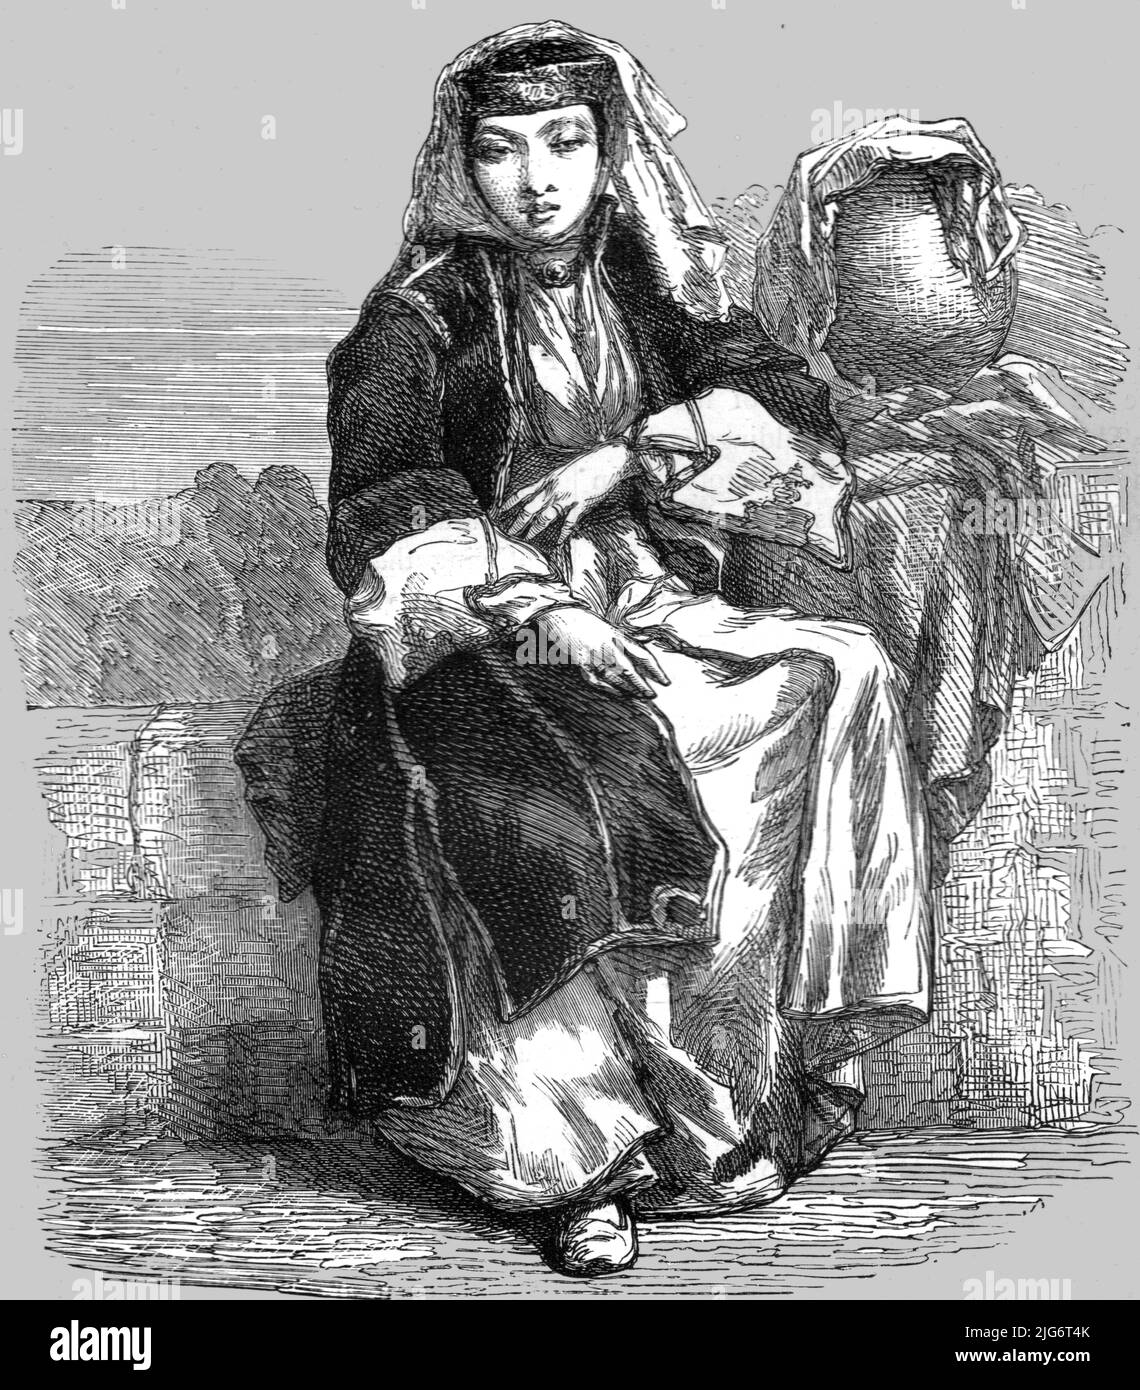 'Young Jewess of Salonica; Notes on Albania', 1875. From, 'Illustrated Travels' by H.W. Bates. [Cassell, Petter, and Galpin, c1880, London] Belle Sauvage Works.London E.C. Stock Photo